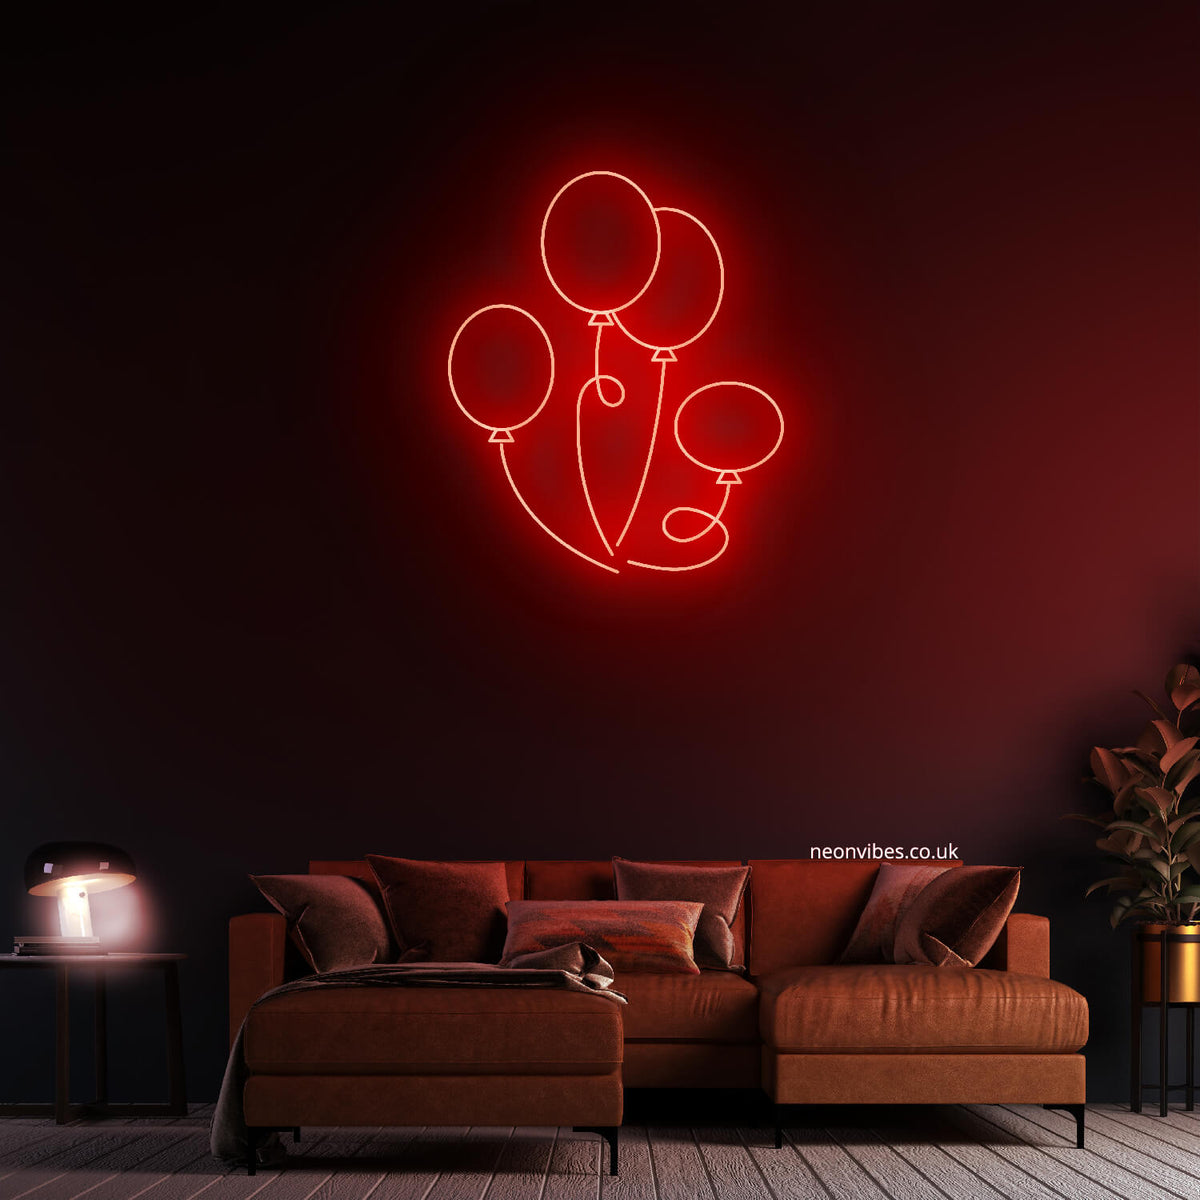 Bunch of balloons neon sign